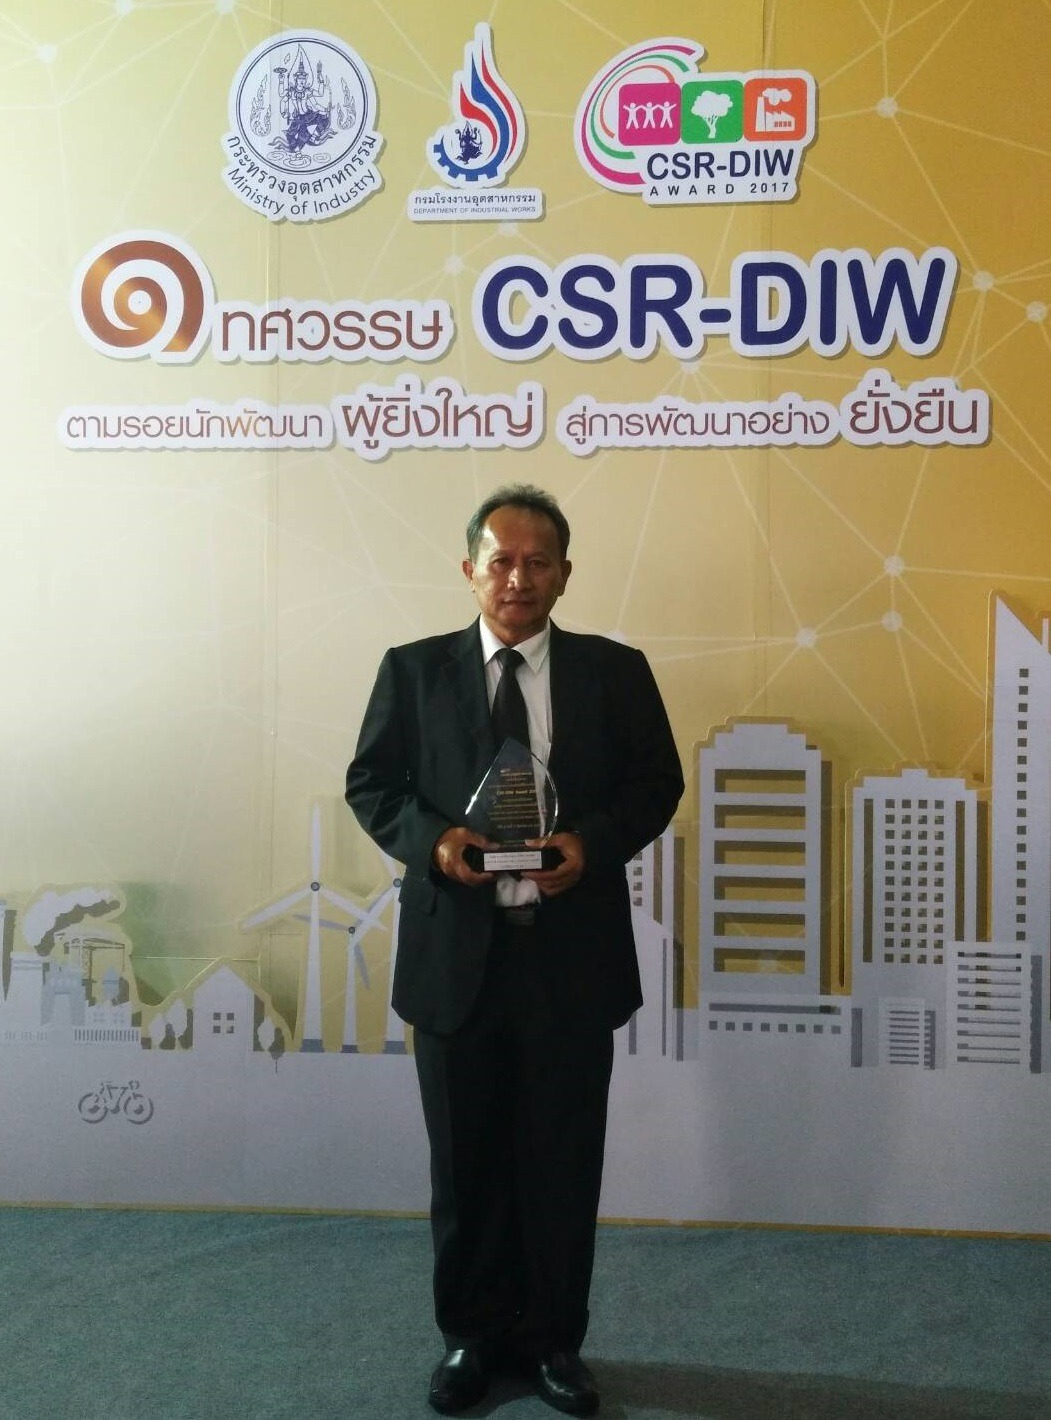 CORPORATE SOCIAL RESPONSIBILITY DEPARTMENT OF INDUSTRIAL WORKS (CSR-DIW)